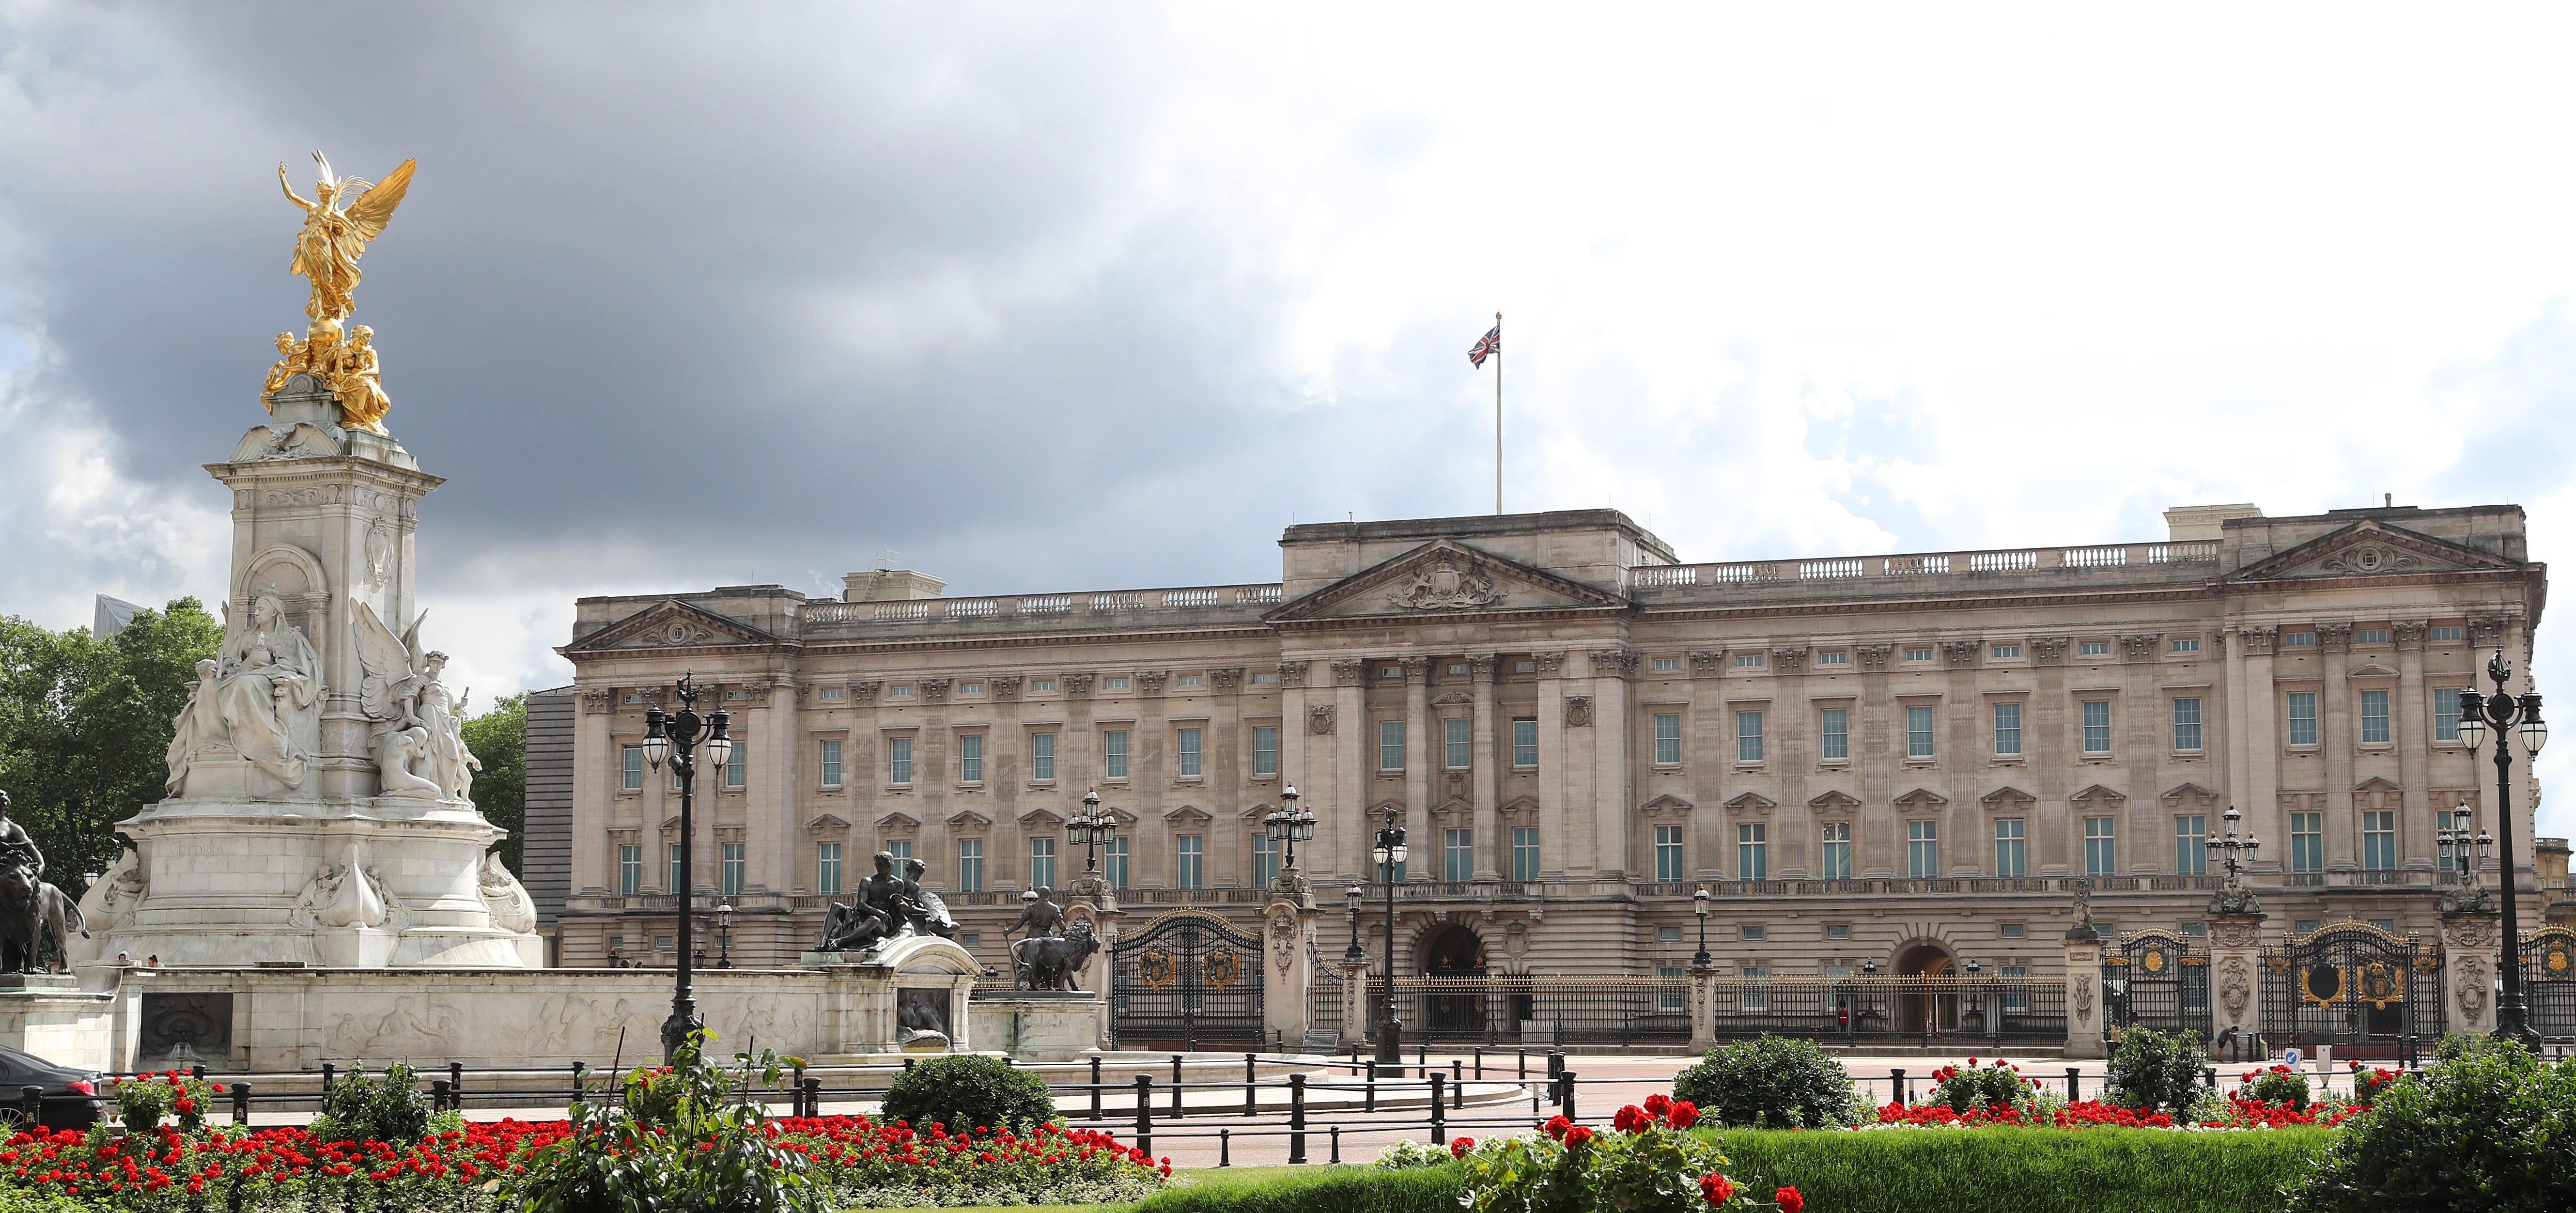 Why Is Buckingham Palace Boarded Up? The Queen Isn't Staying There Now